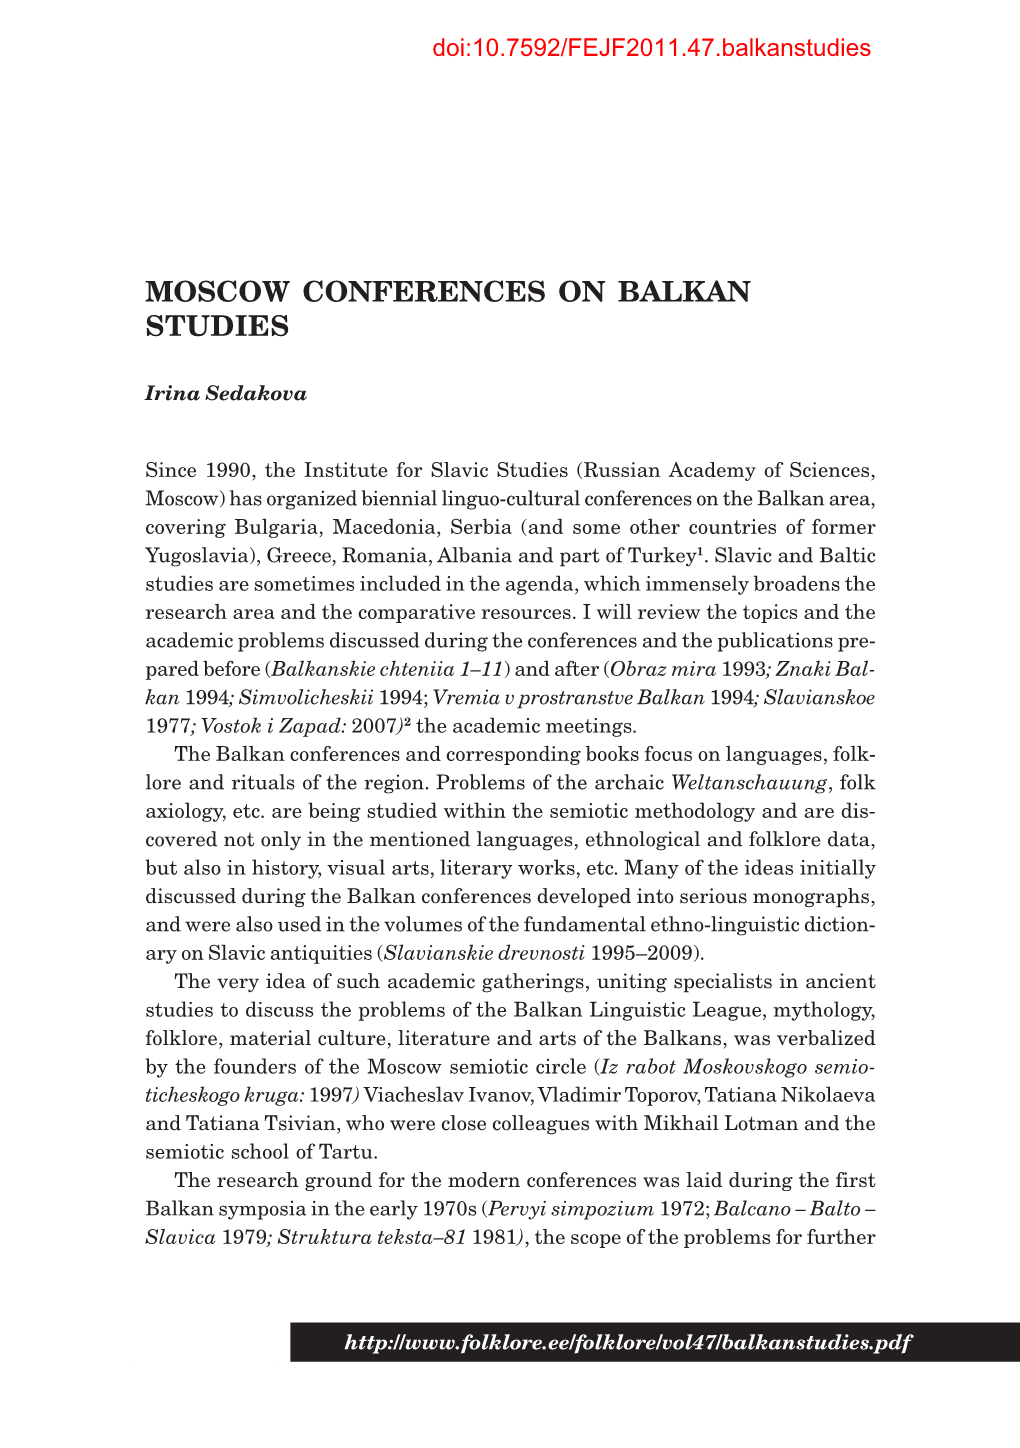 Moscow Conferences on Balkan Studies